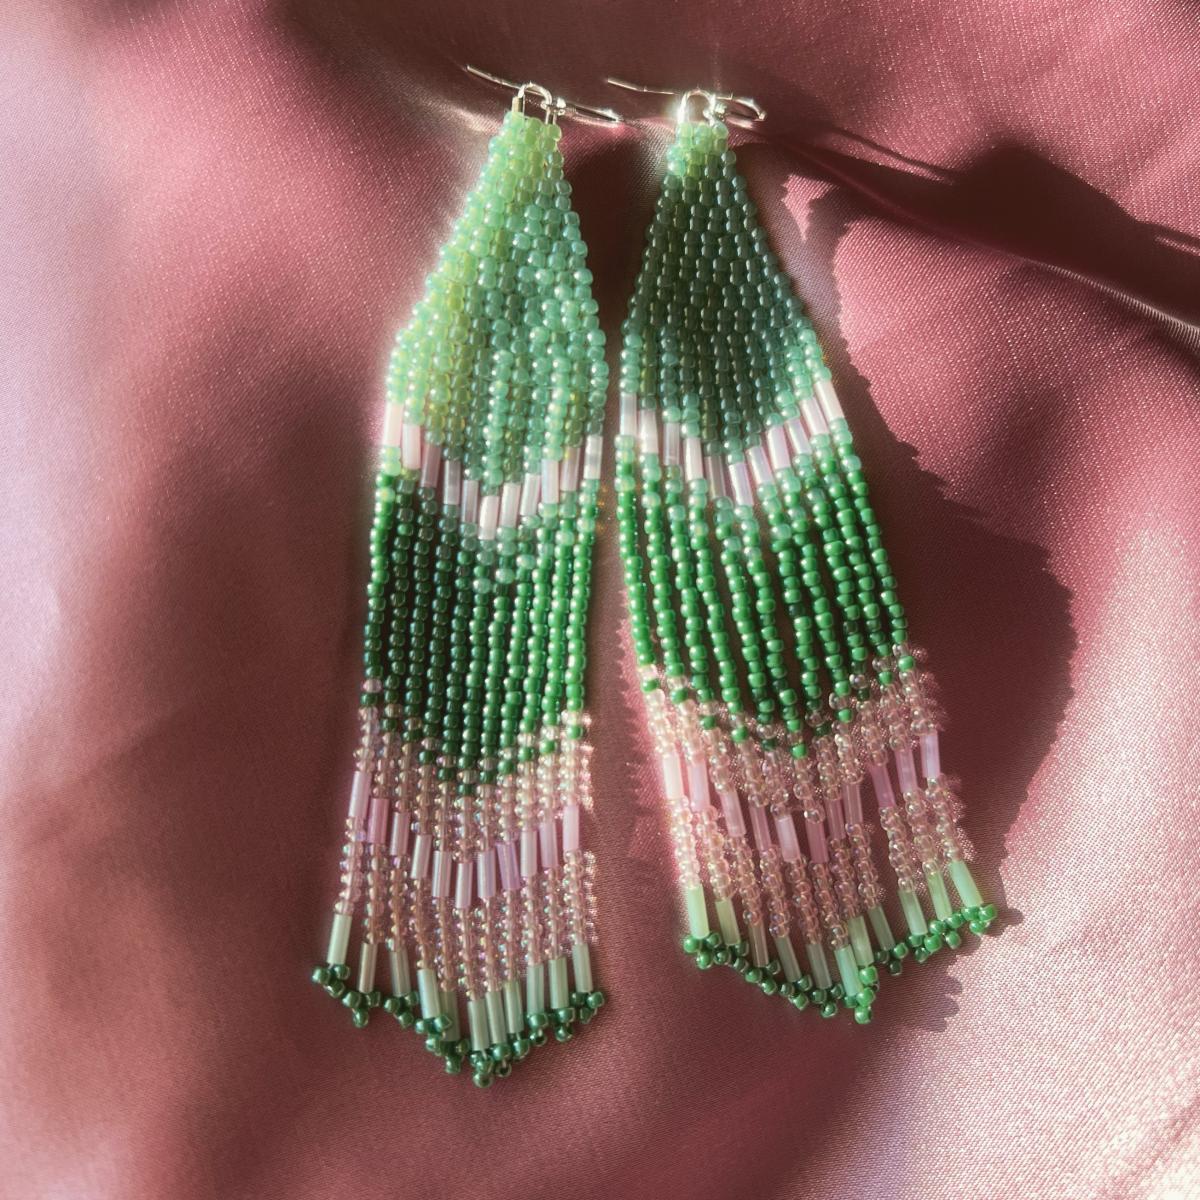 green beaded earrings on pink cloth